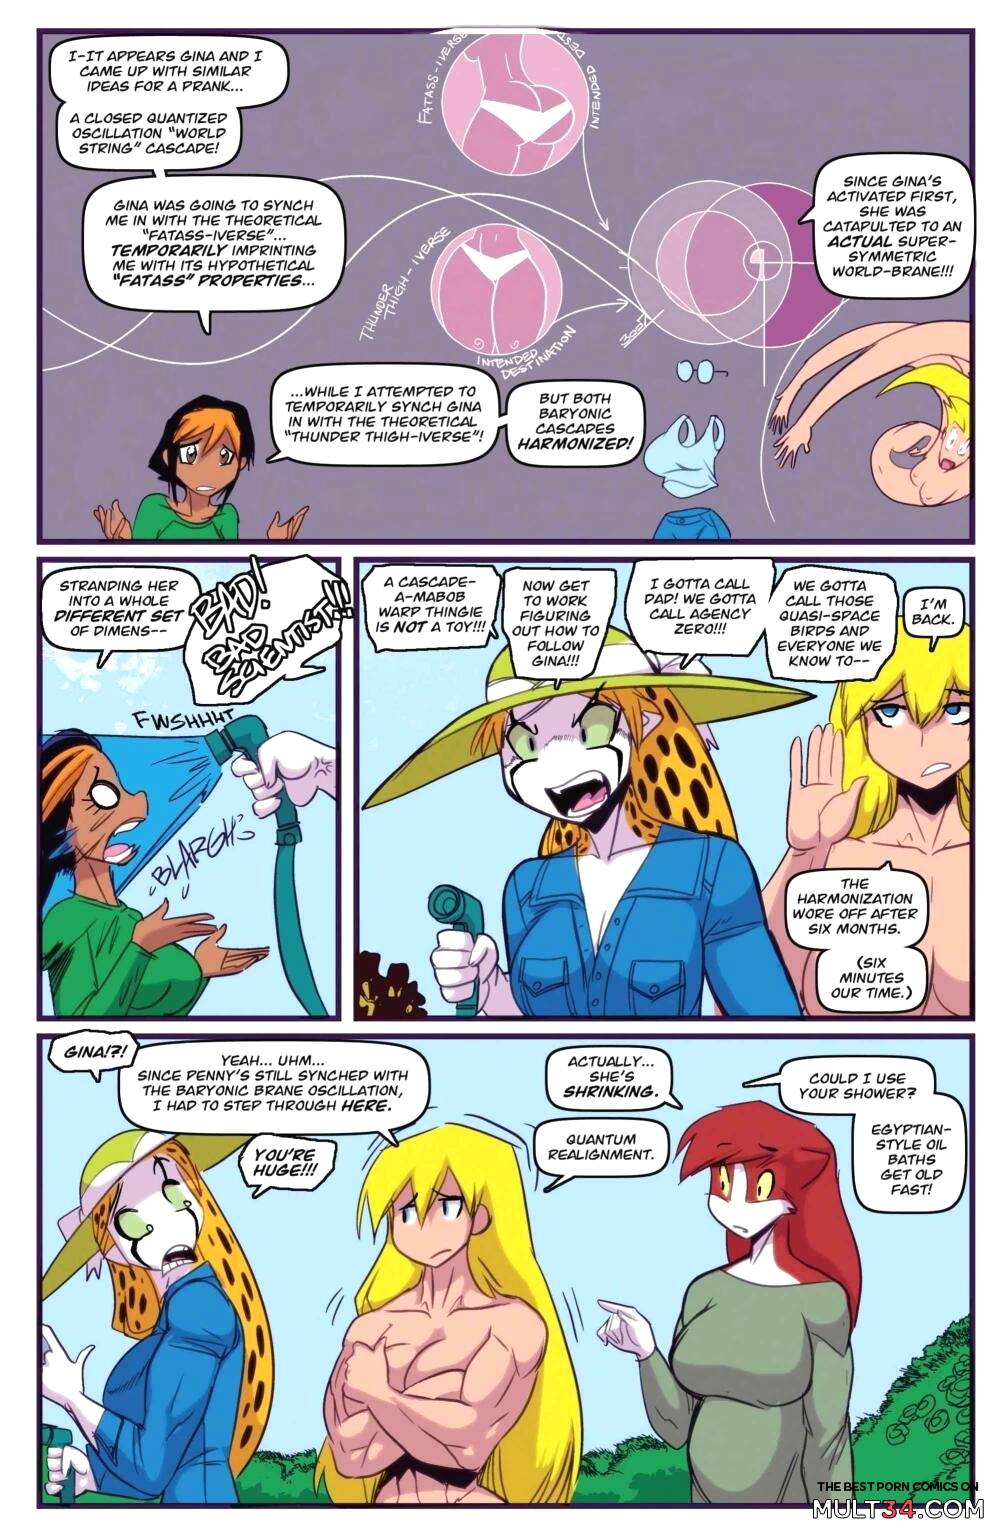 Gina Diggers Warnnerd of Mars page 102